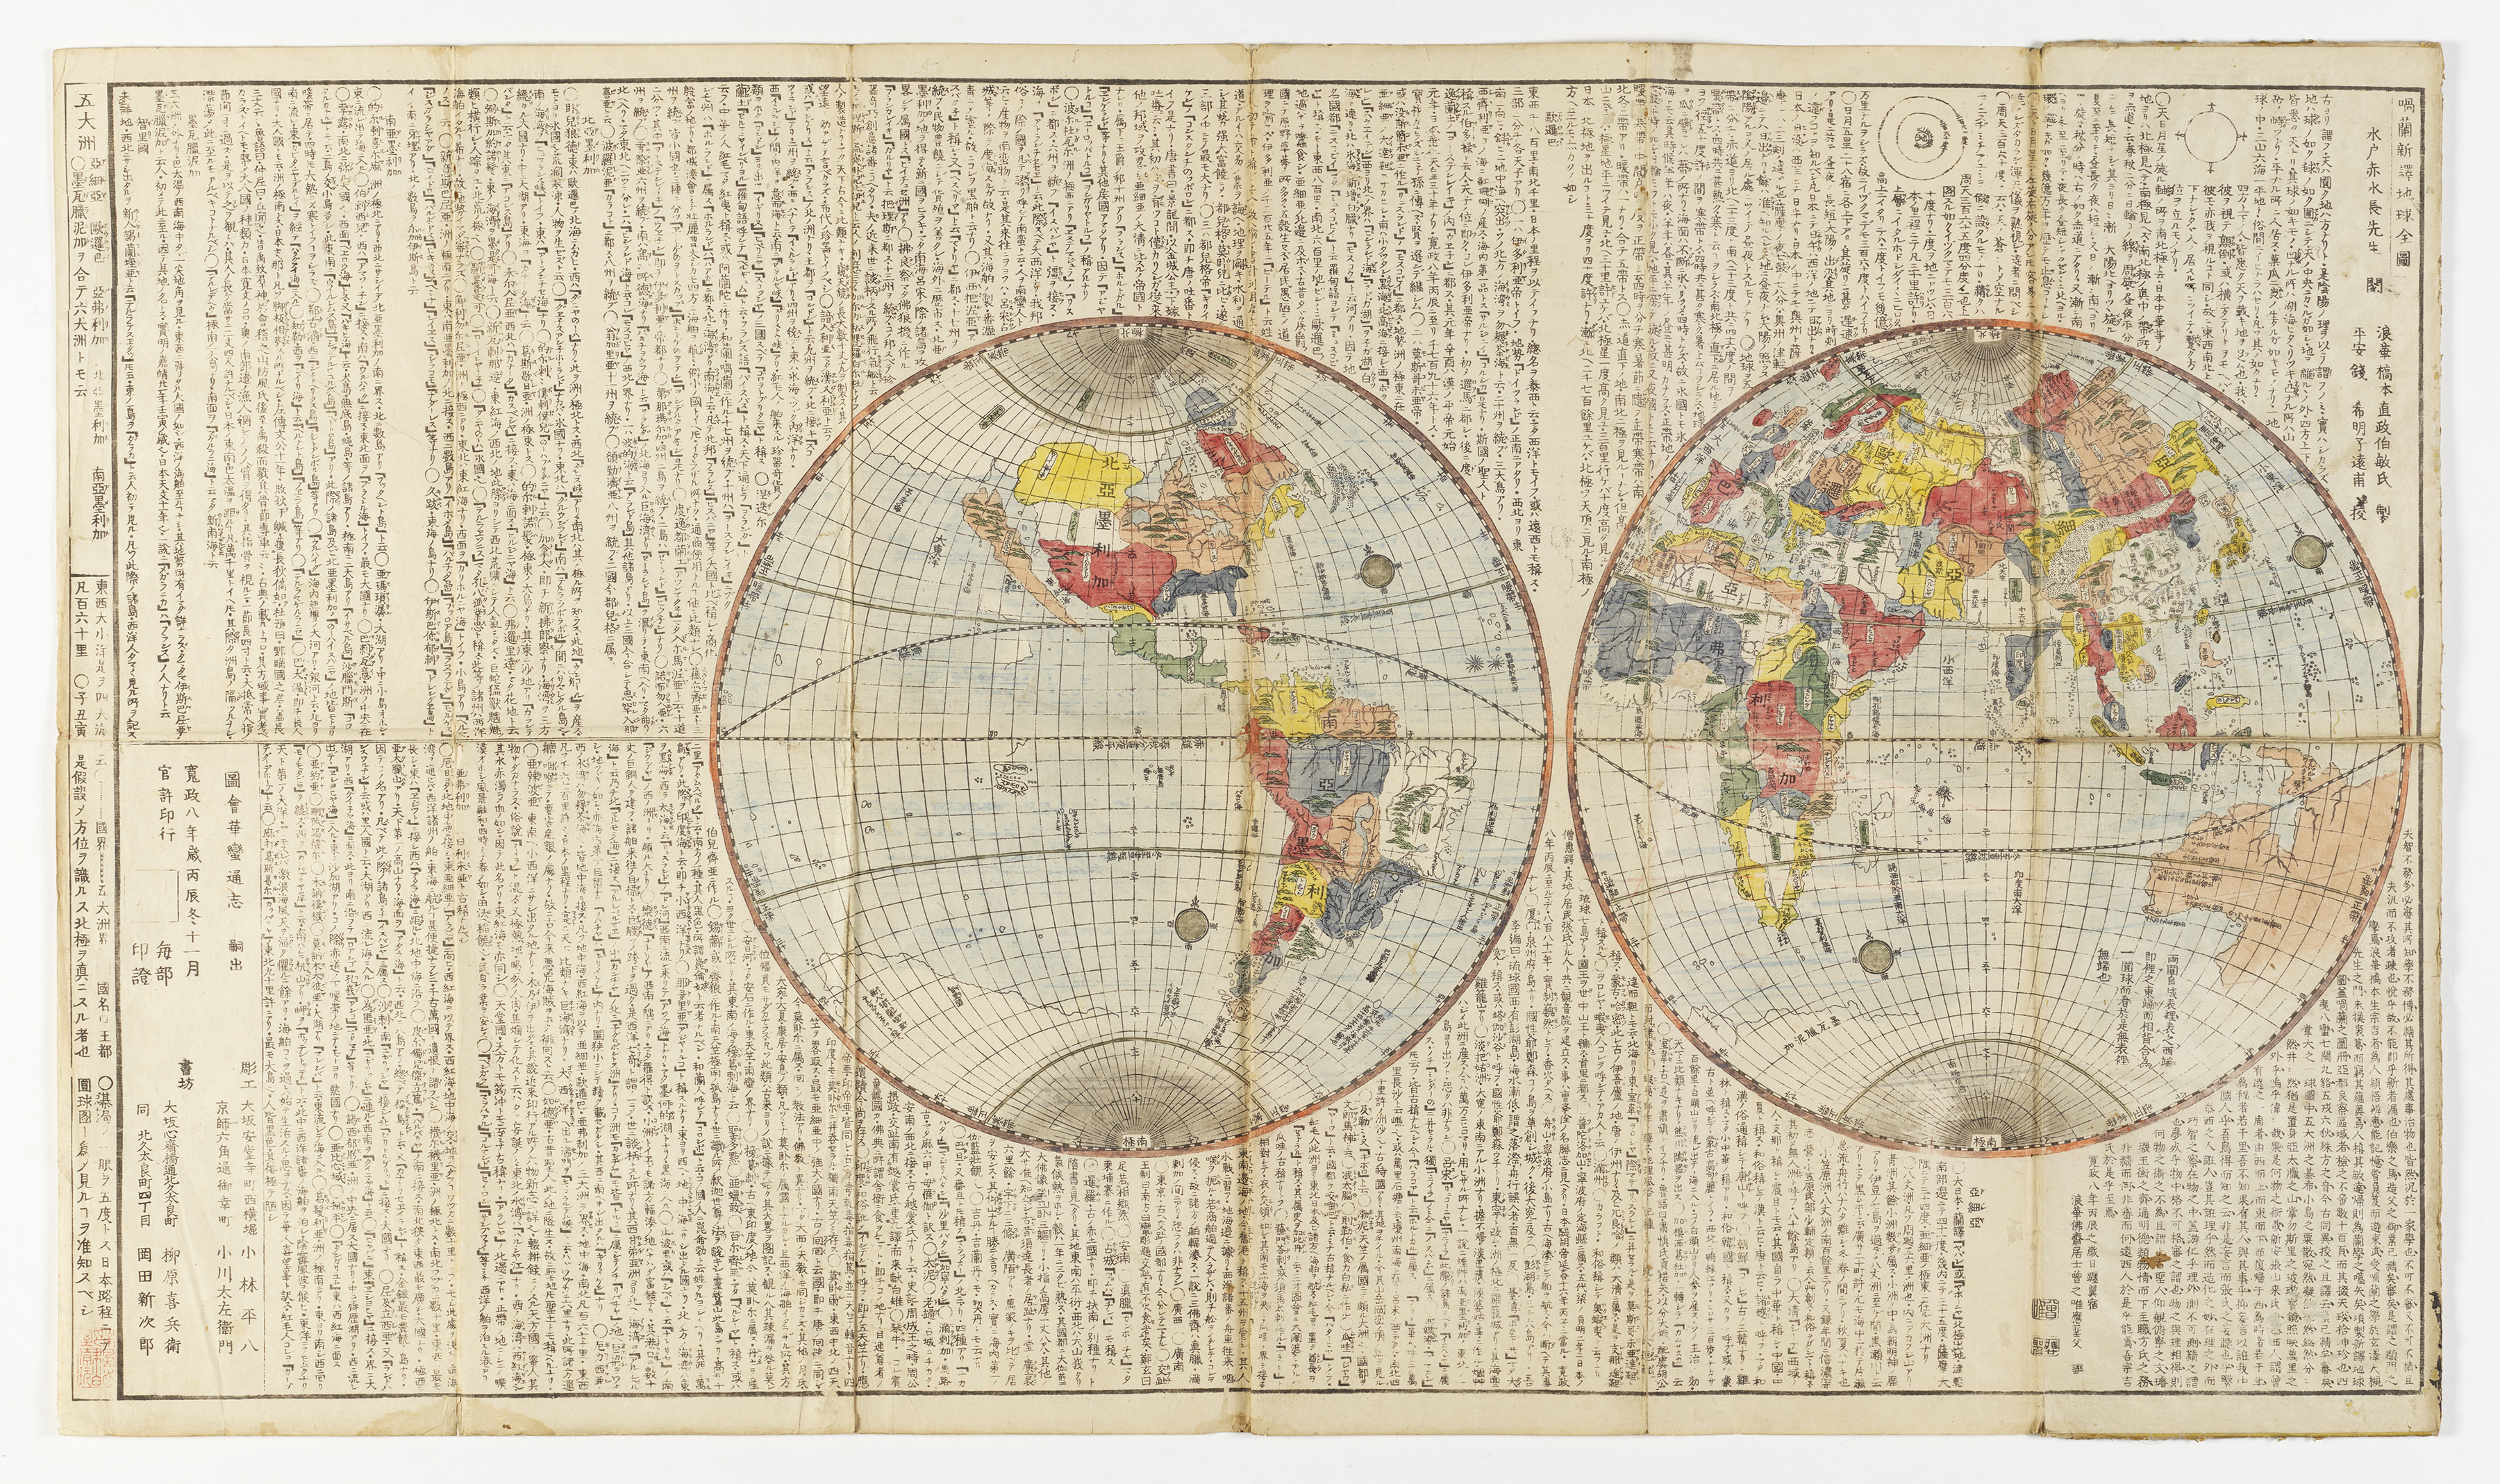 Japanese world map showing two hemispheres surrounded by text